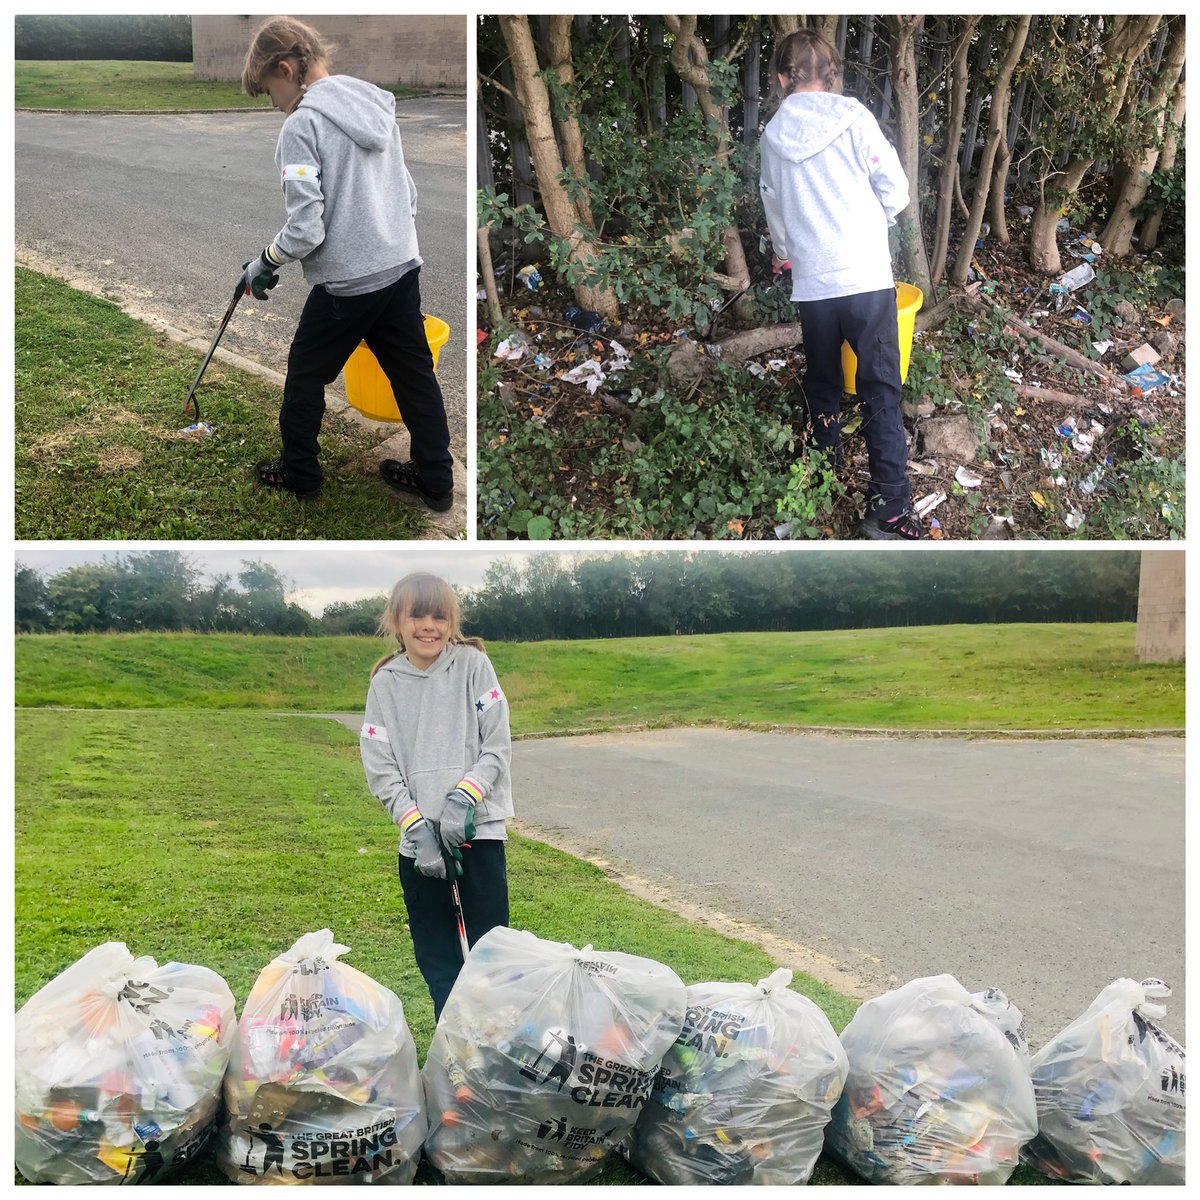 #GBSeptemberClean.
Litter Pick #12 of 17 💚
6 bags collected from around Leasowe Leisure Centre. 
So many plastic drinks bottles!
Together we can make a difference 💚💚💚
@KeepBritainTidy